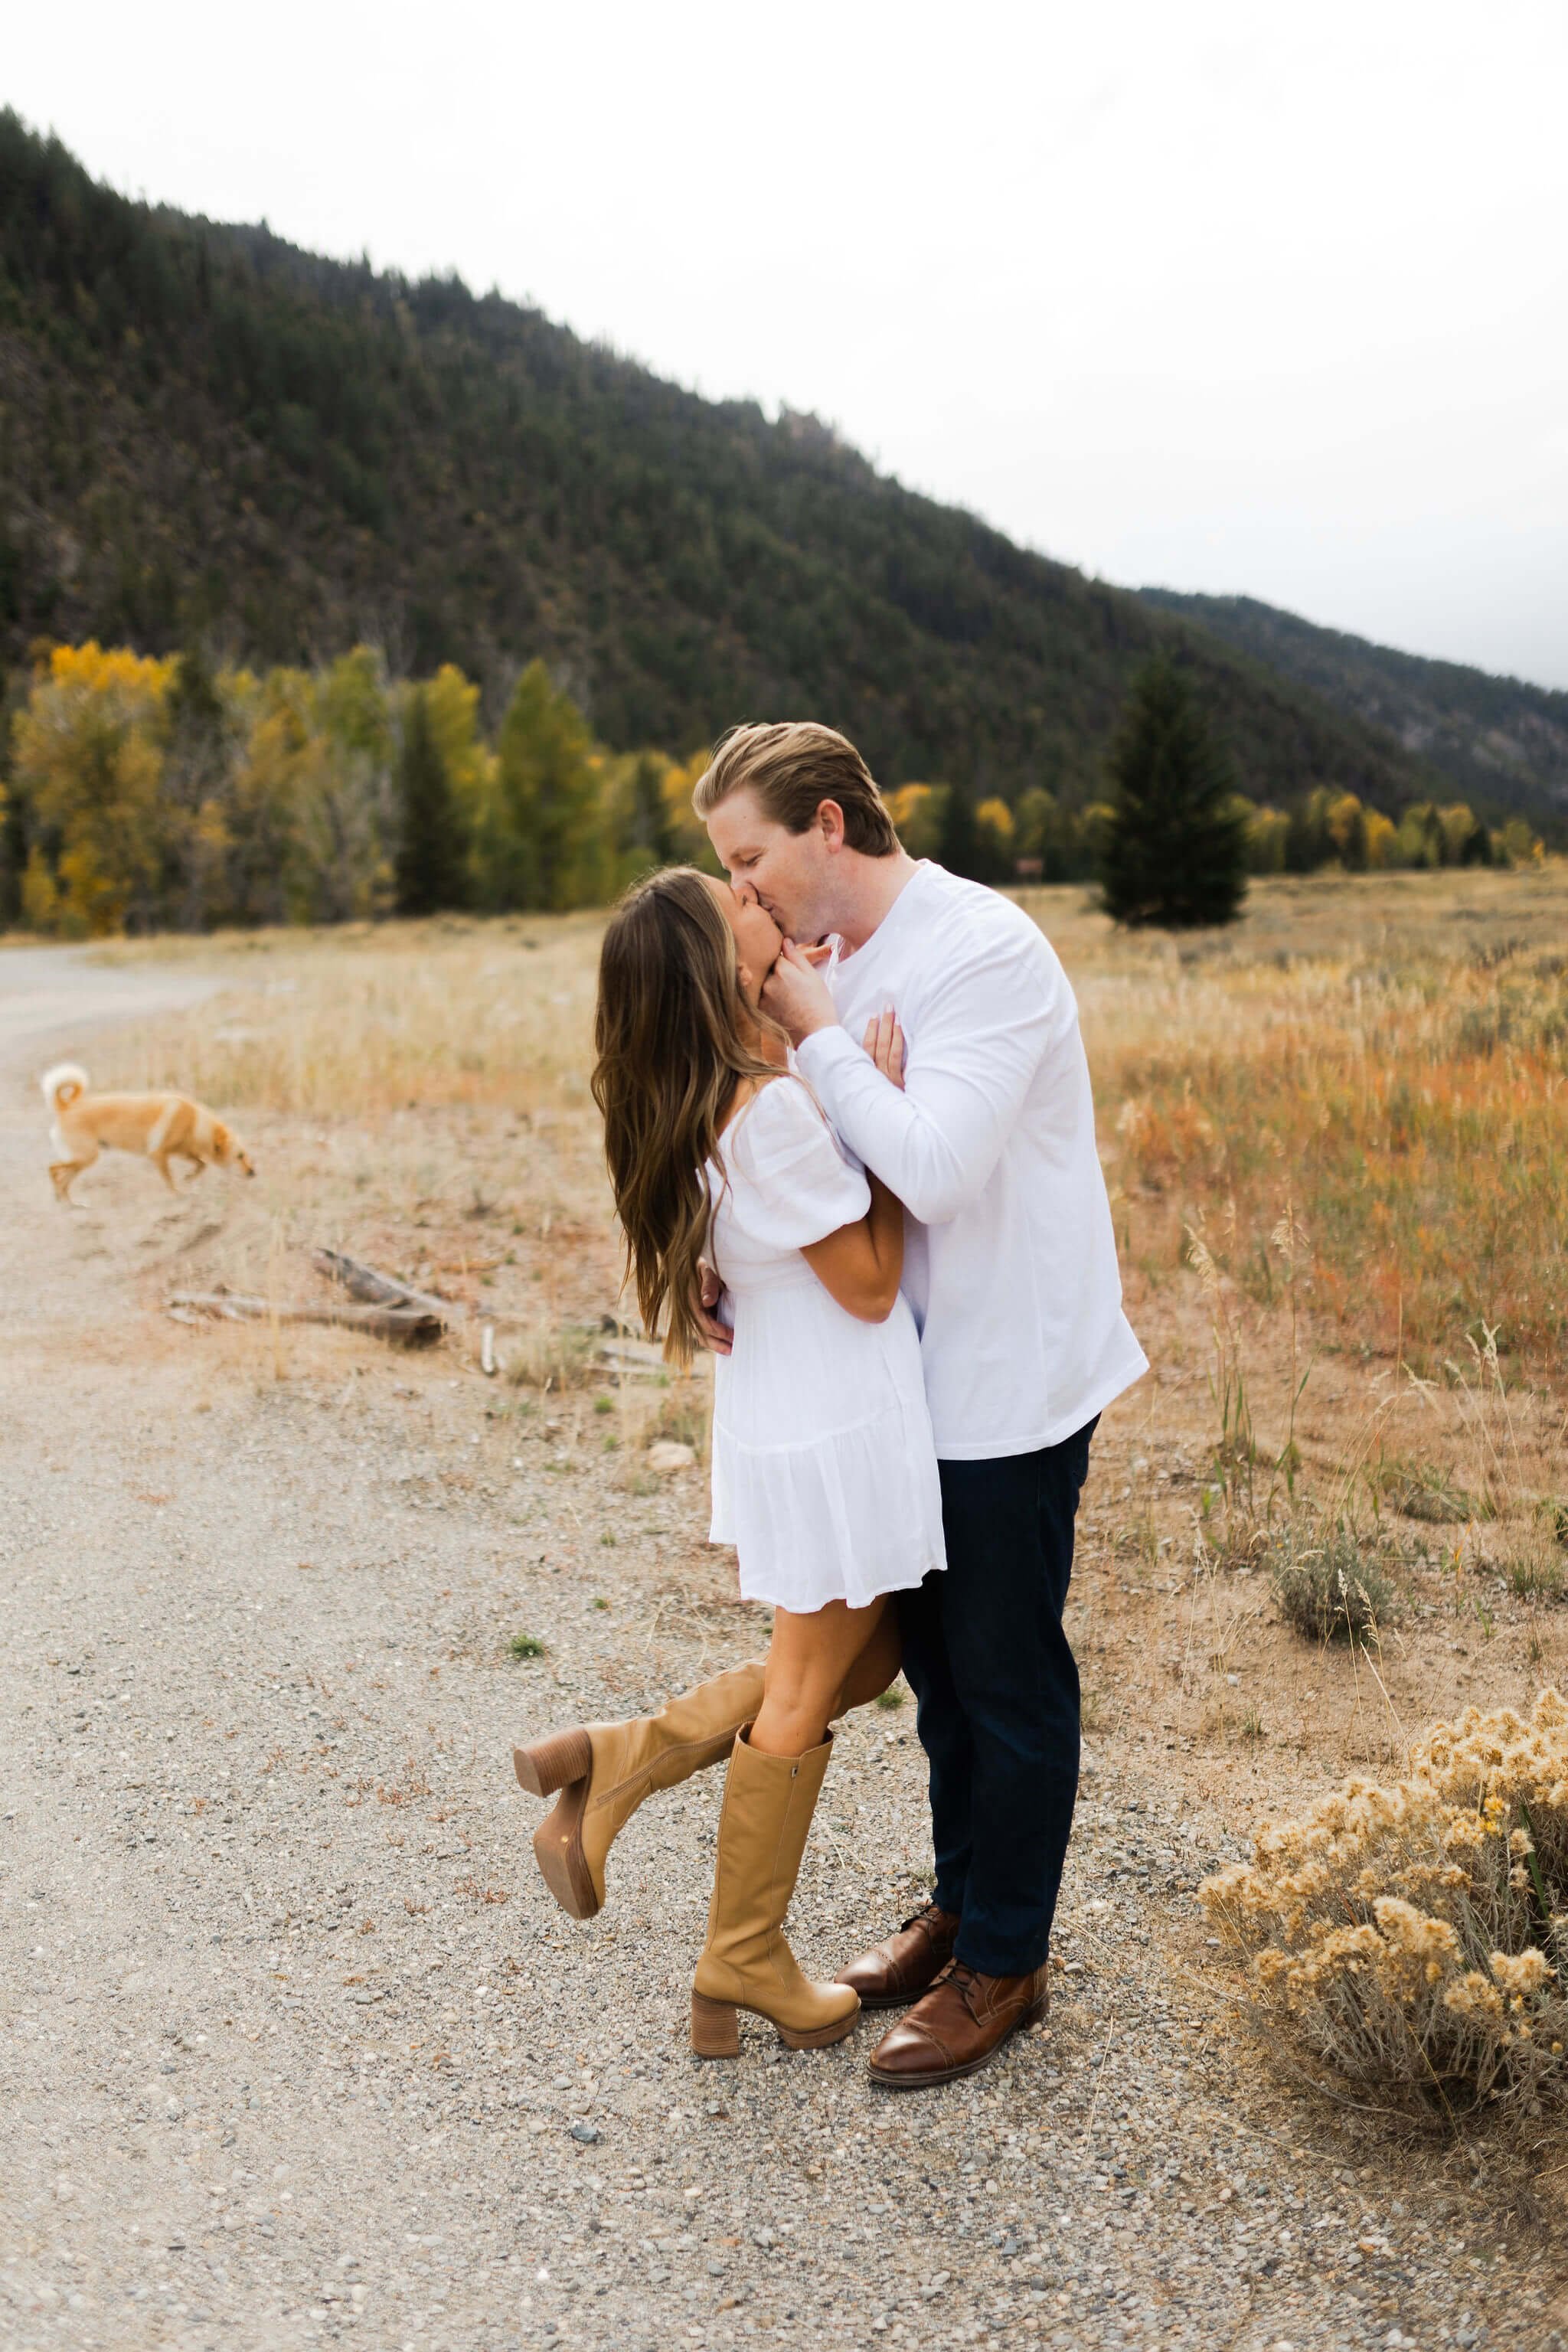 Dixie Nyle - Katie and Grant Sun Valley Idaho Adventure Engagement Session11.jpg